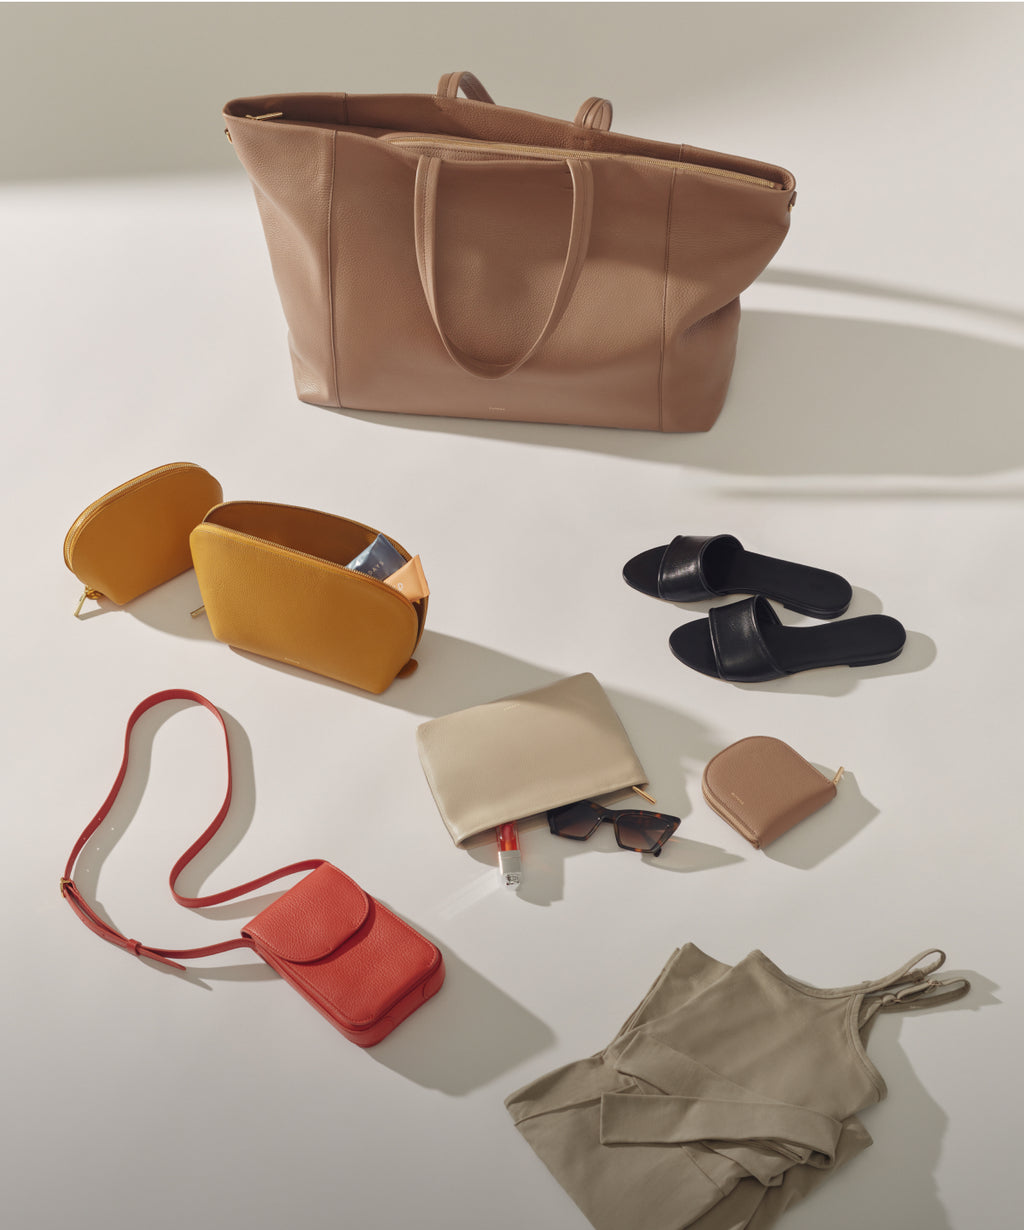 Large Beige tote (top), folded clothing and leather accessories in sage, yellow, red, beige, and black. Linked image. 